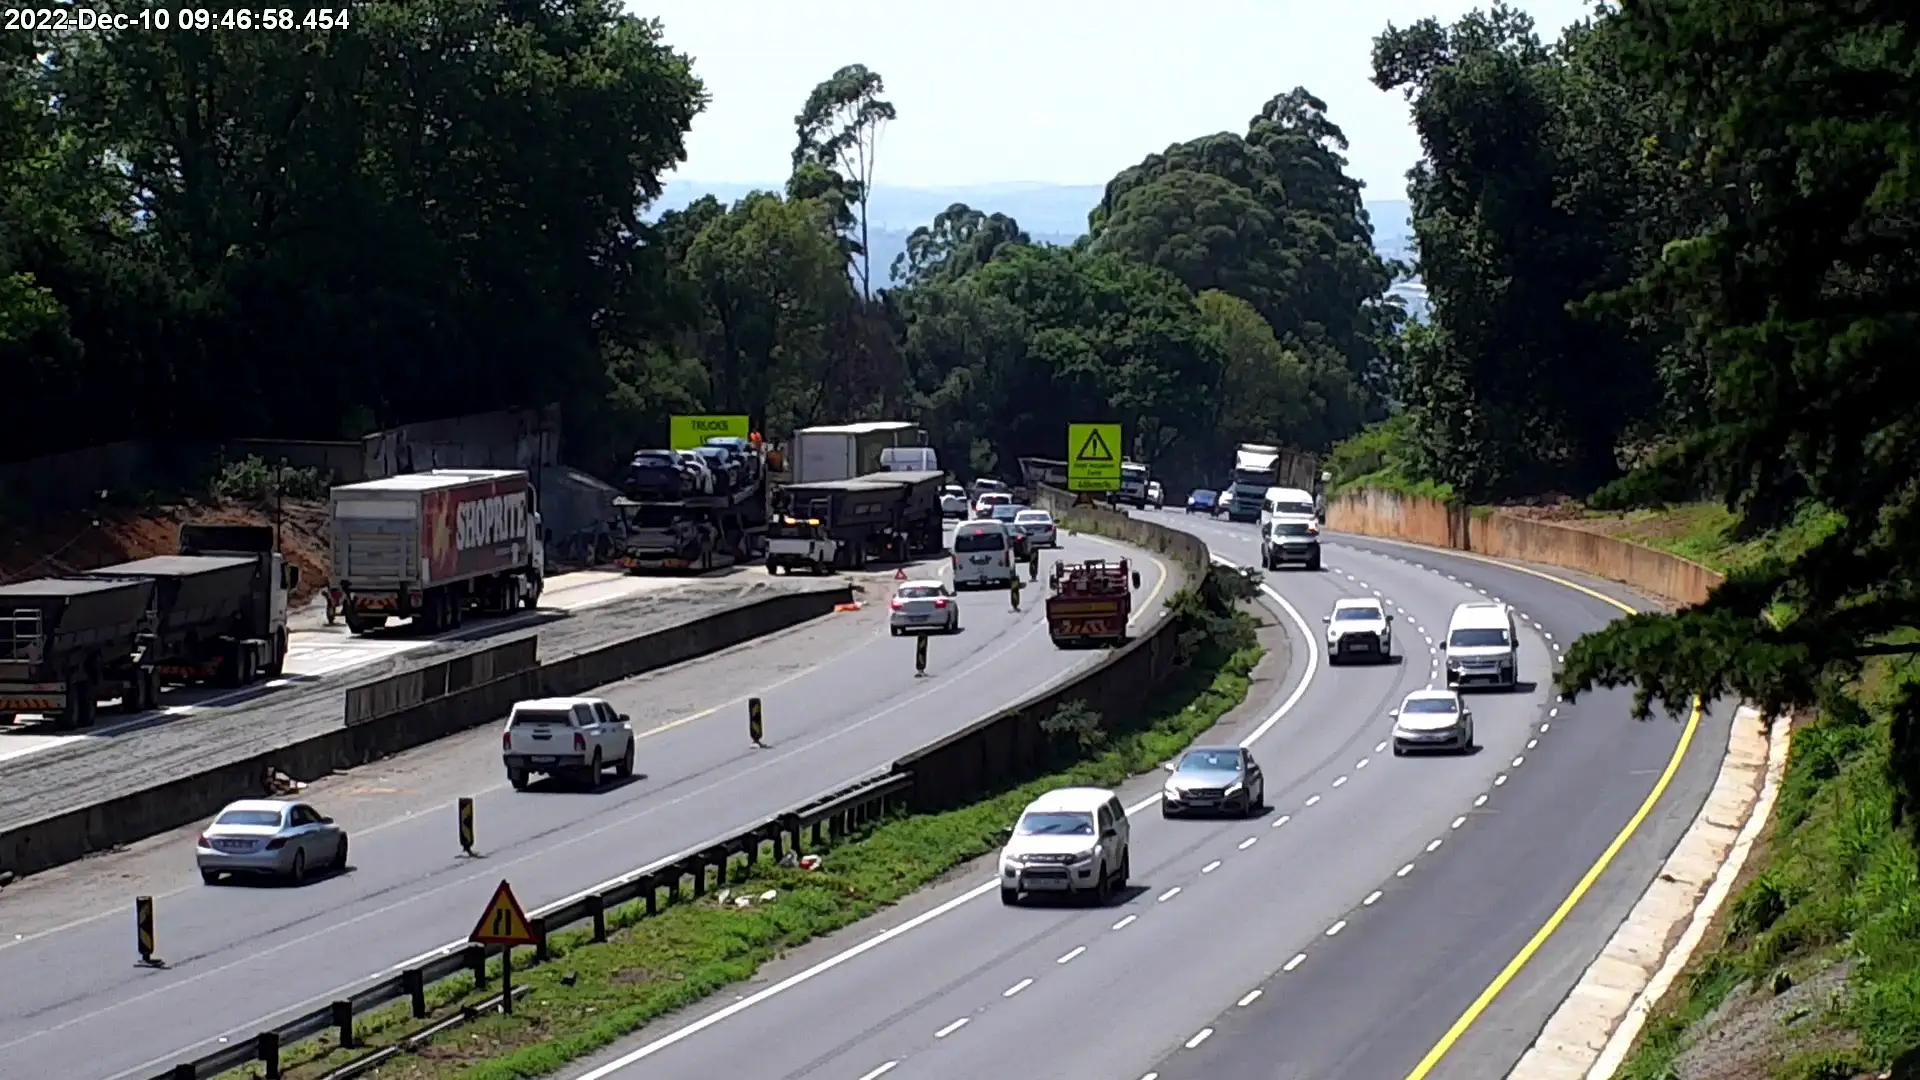 All lanes will be fully open on N3 Town Hill during Christmas period